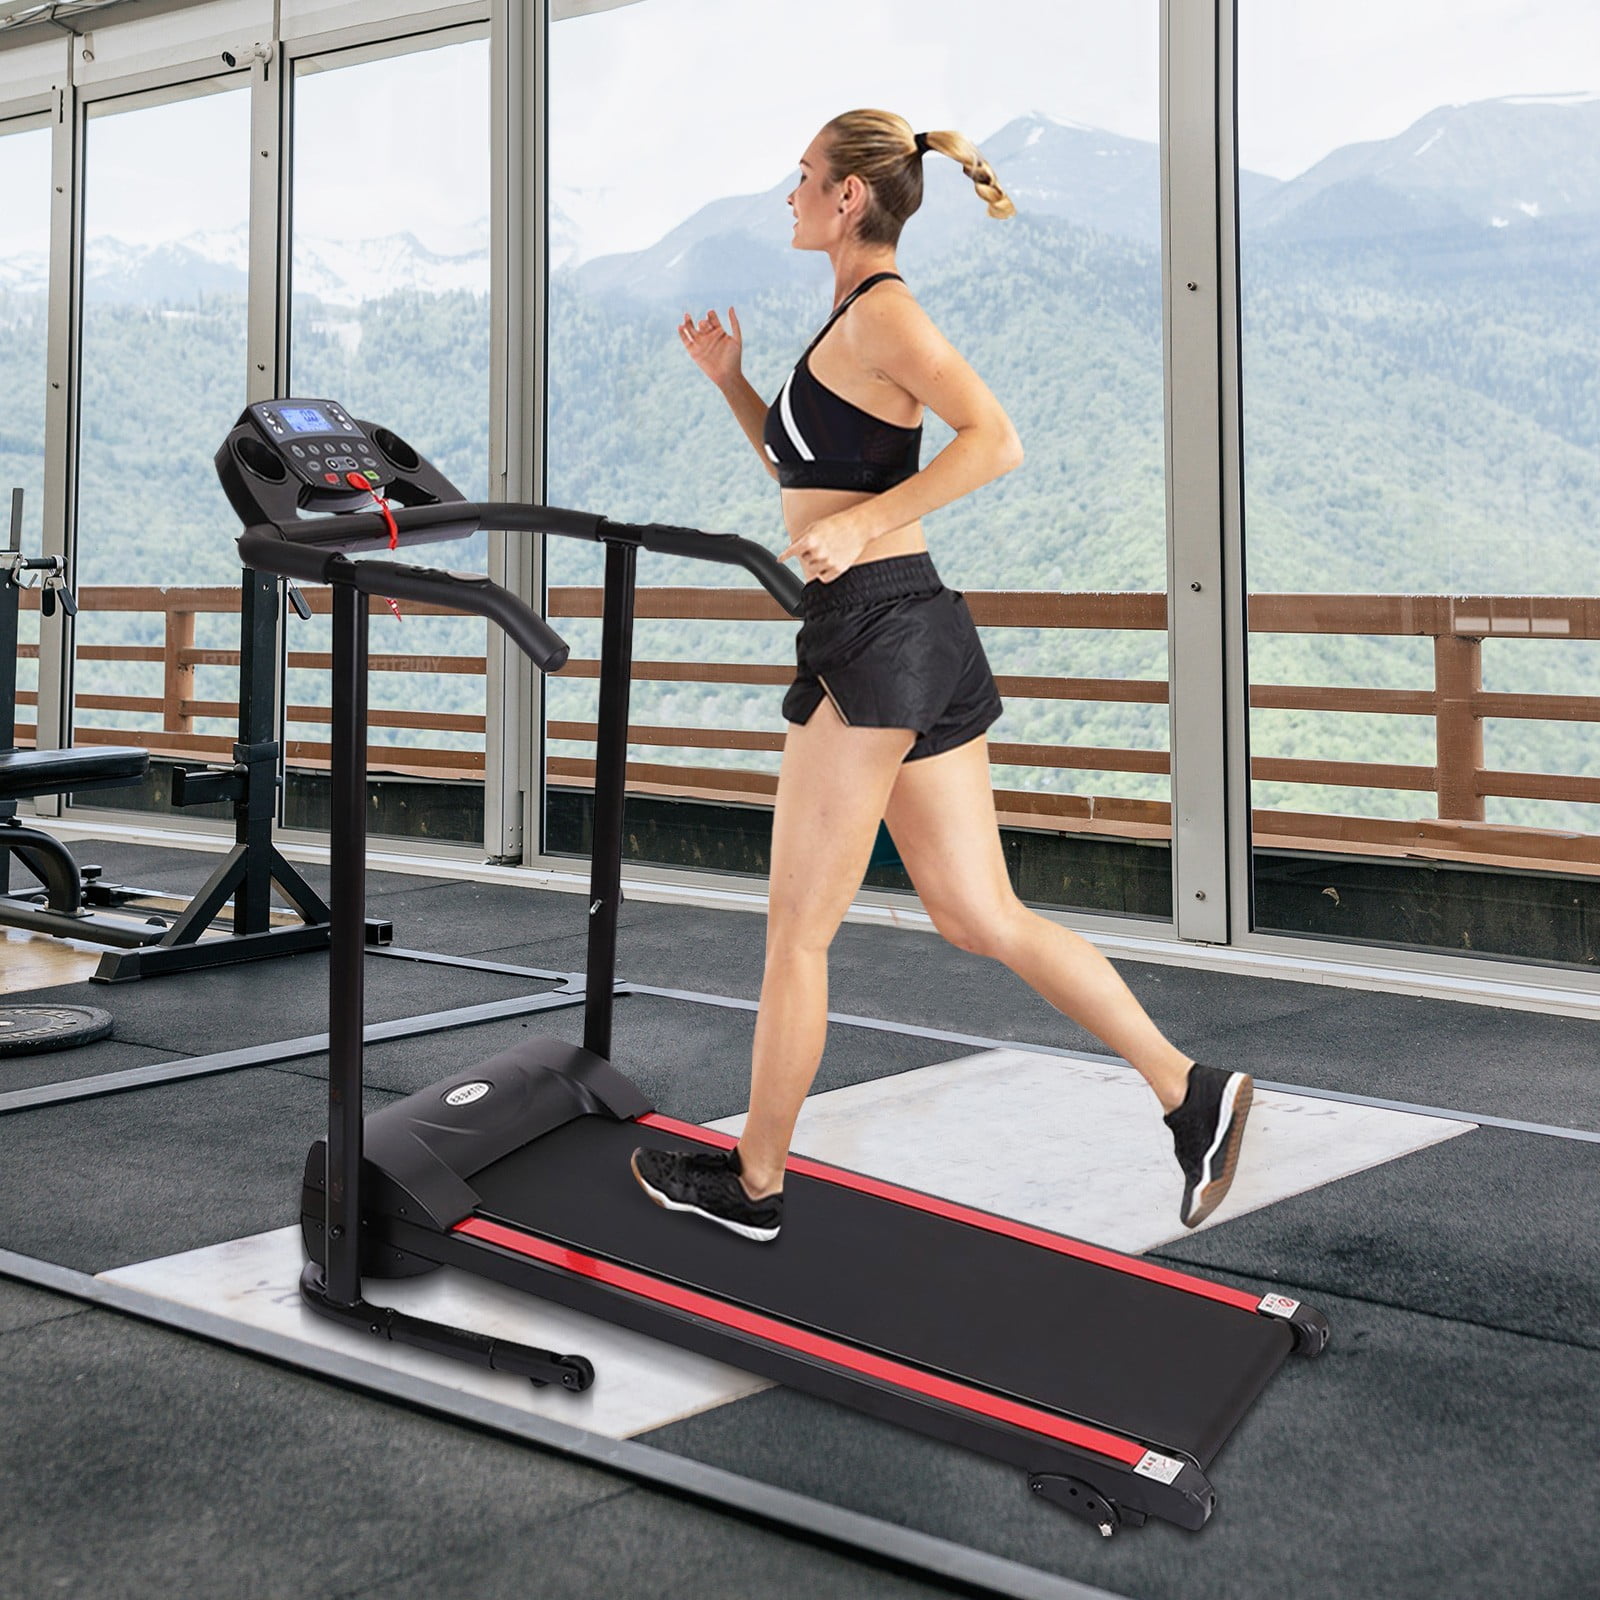 Details about   1100W Electric Folding Treadmill With Device Holder Shock Absorption And Incline 